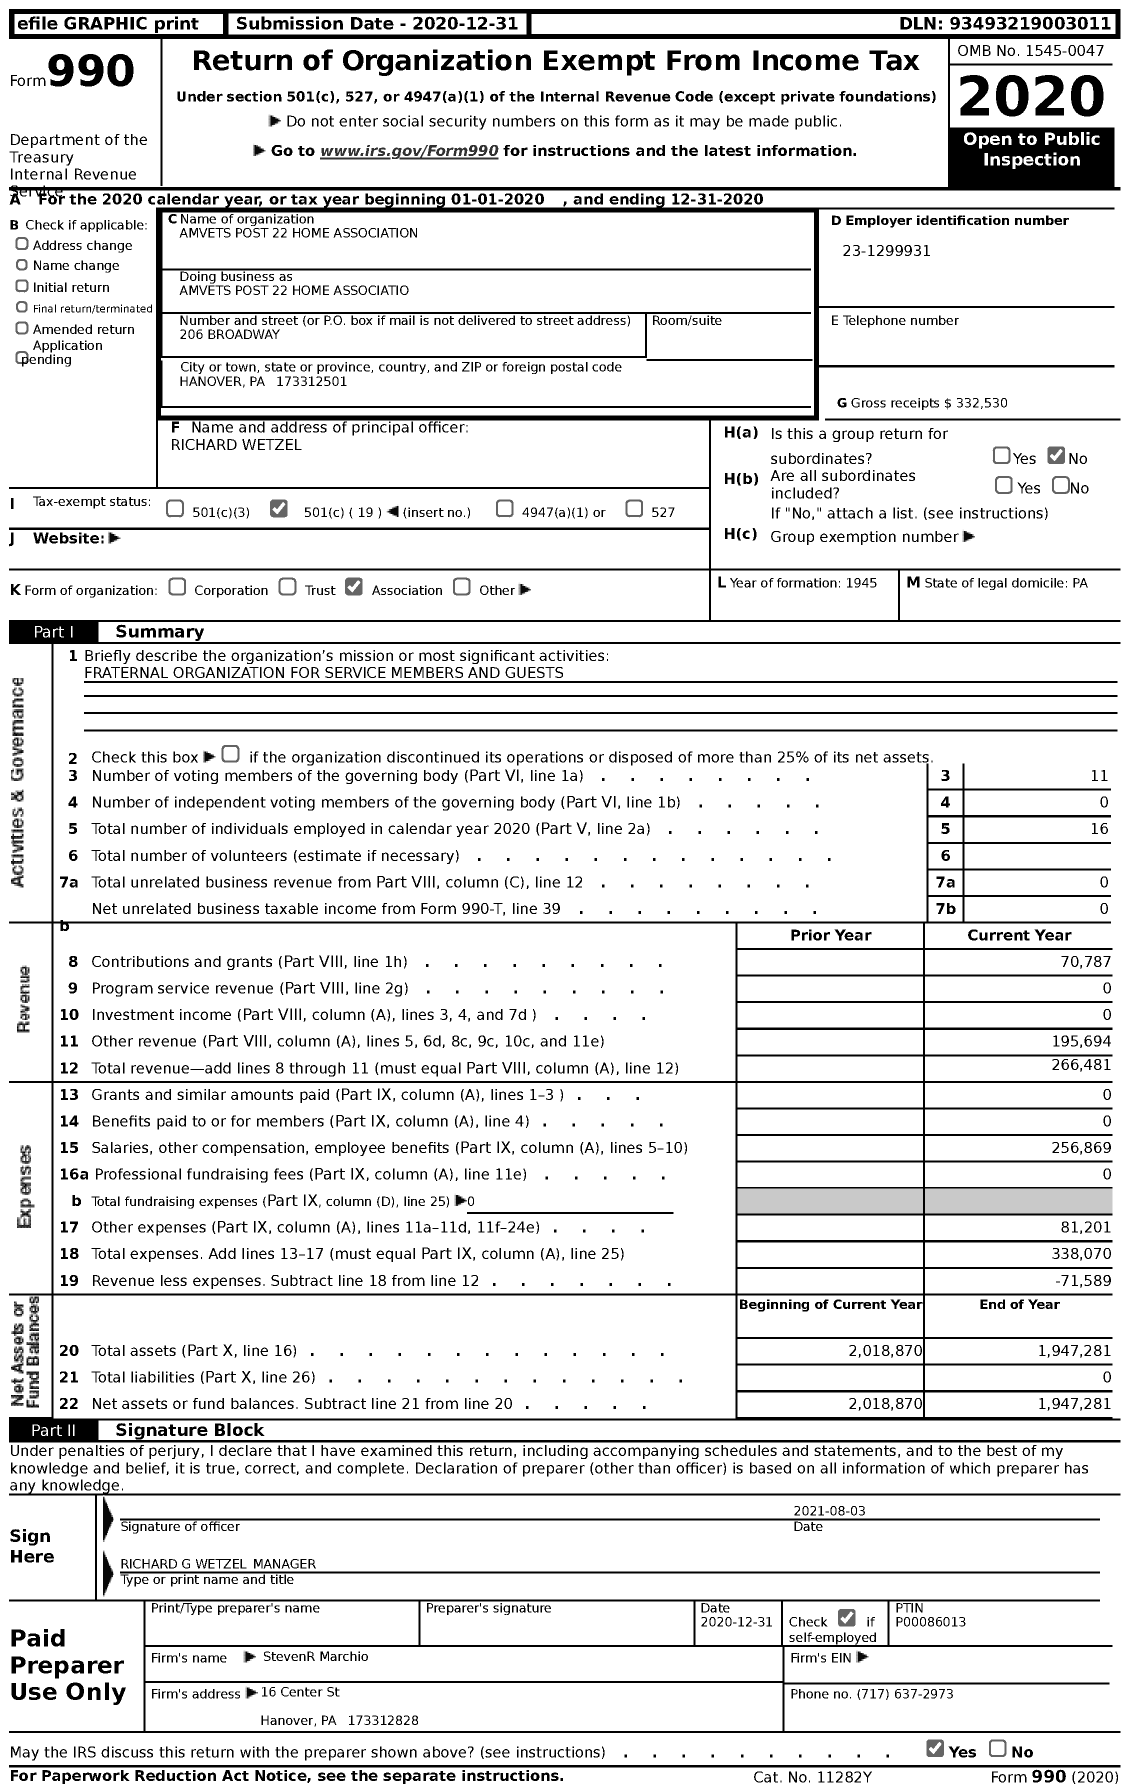 Image of first page of 2020 Form 990 for Amvets Post 22 Home Association